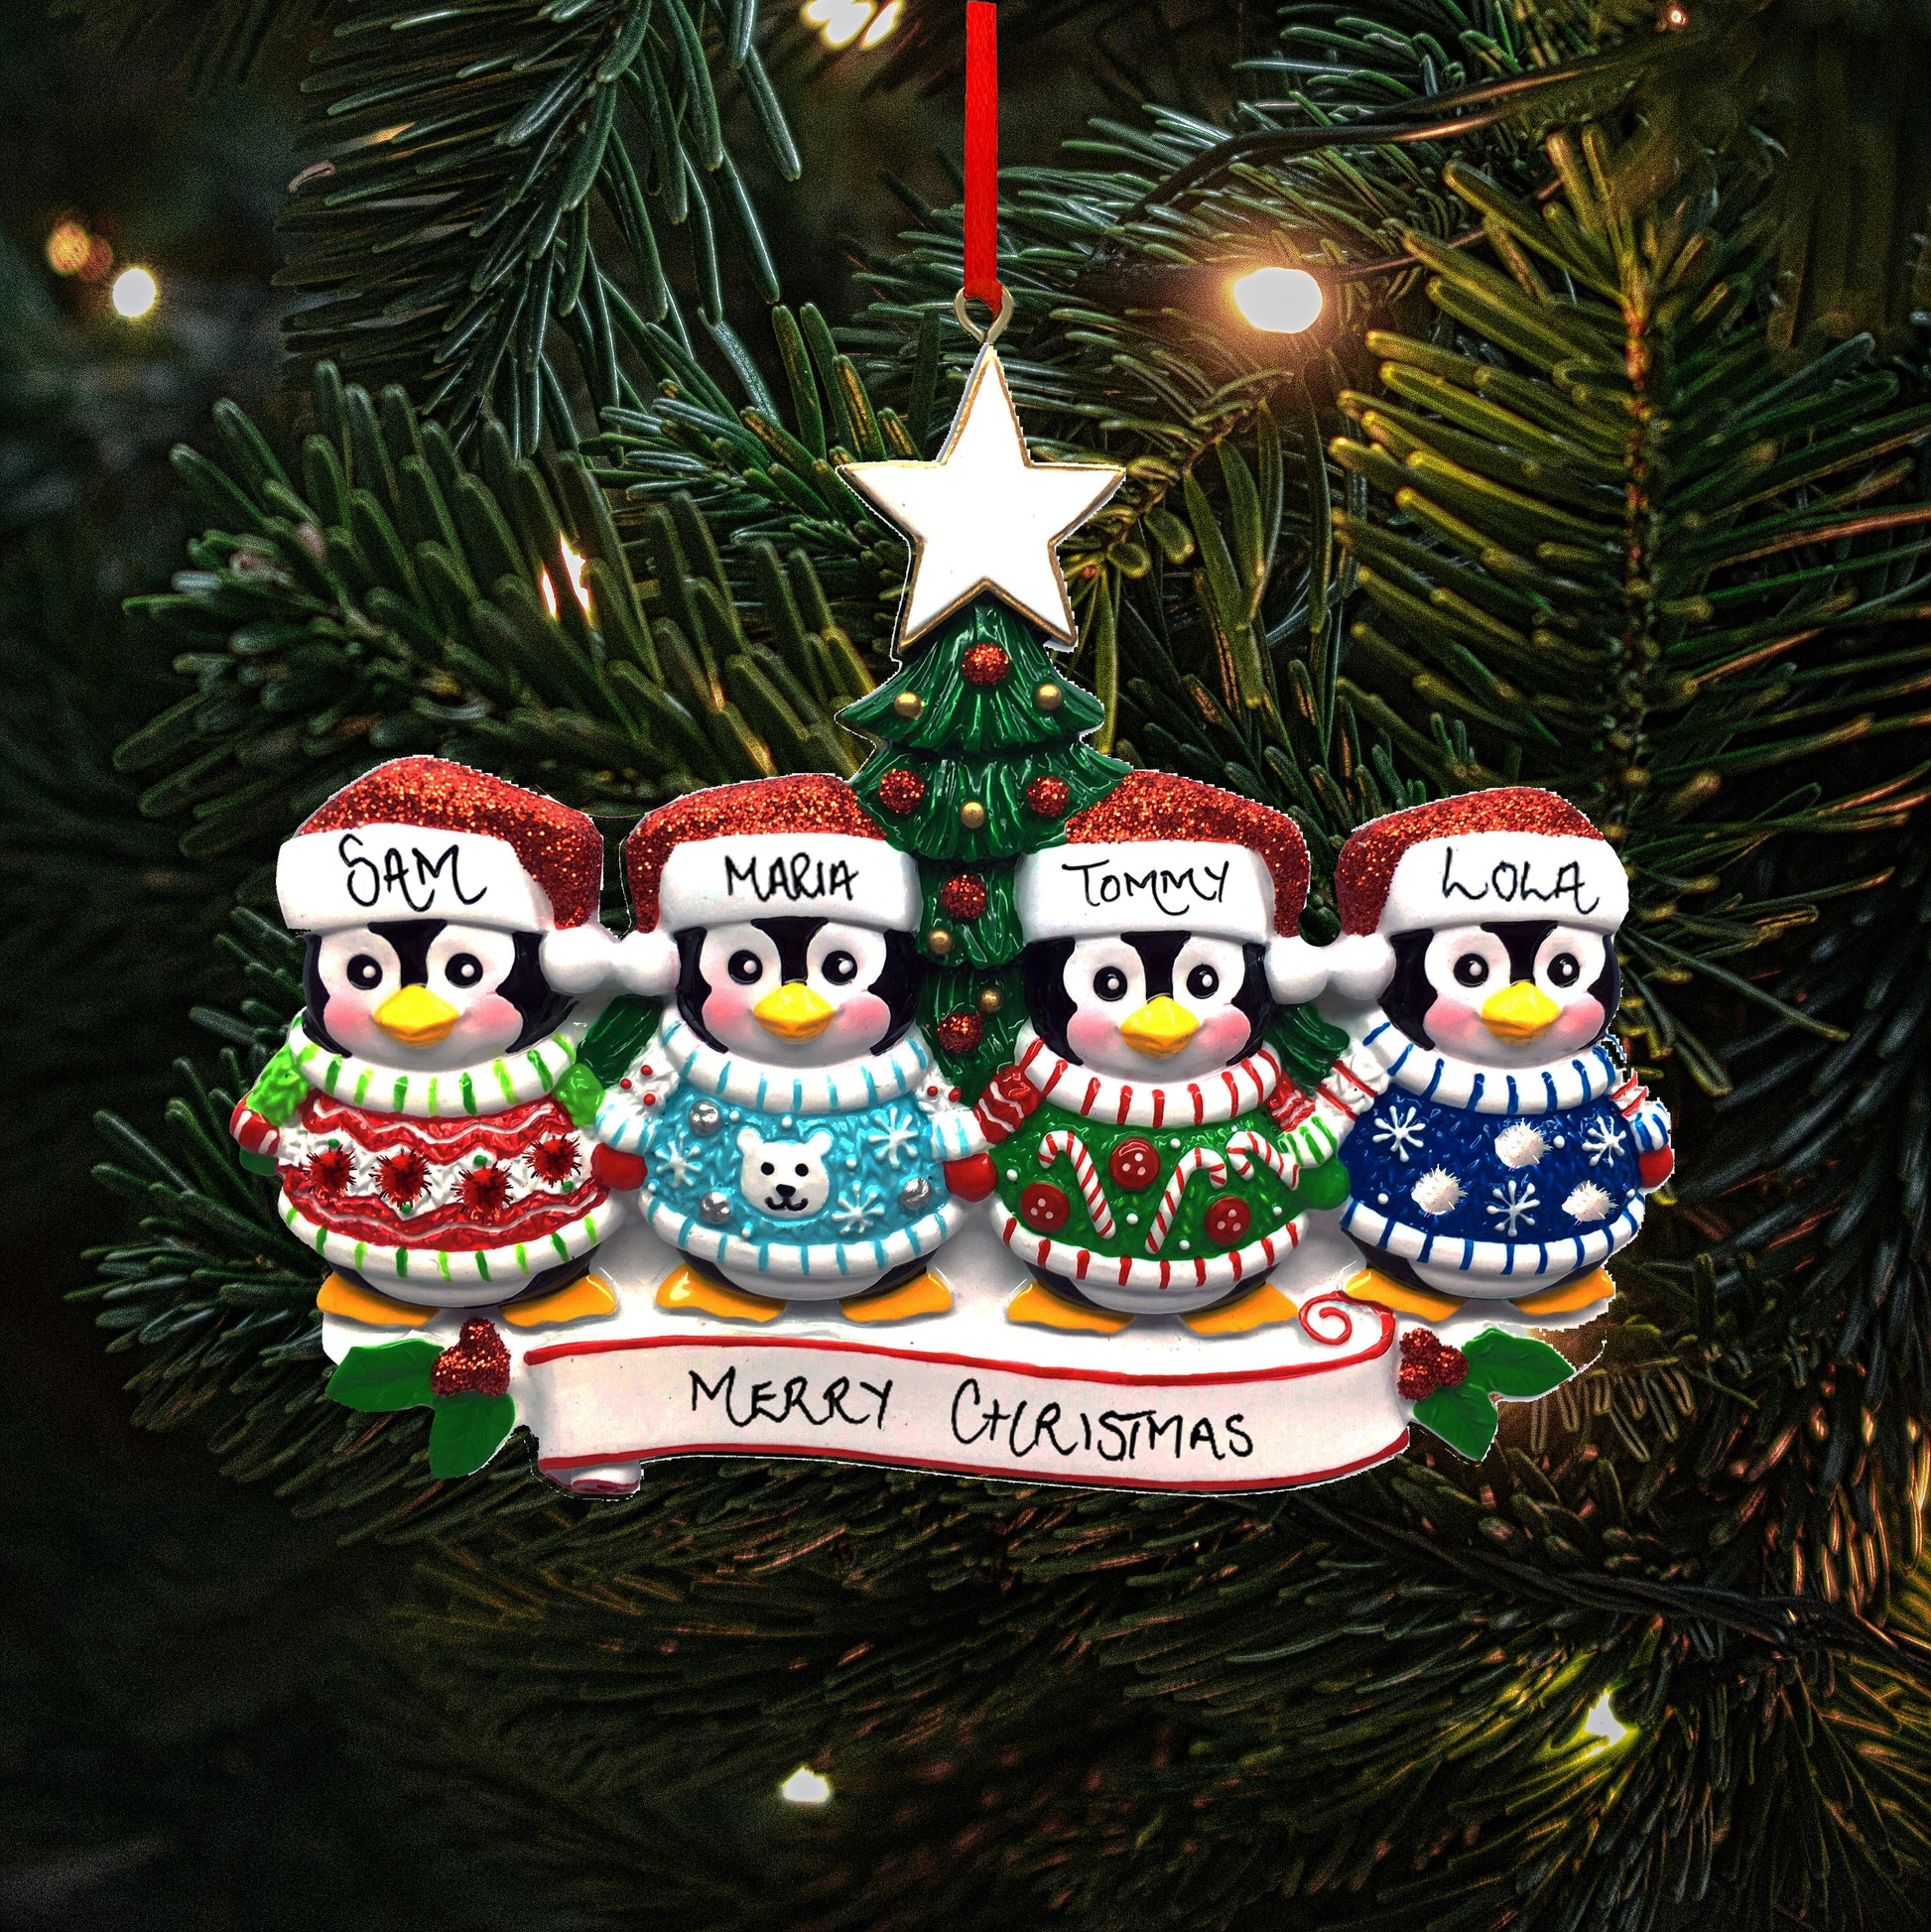 A personalized family of four Christmas decoration featuring four penguins with the names 'Sam', 'Maria', 'Tommy' and 'Lola' written on their hats, showing the personalisable capabilities of the ornament. They are perched above a banner reading 'Merry Christmas.' The decoration hangs on a Christmas tree, with lights in the background.